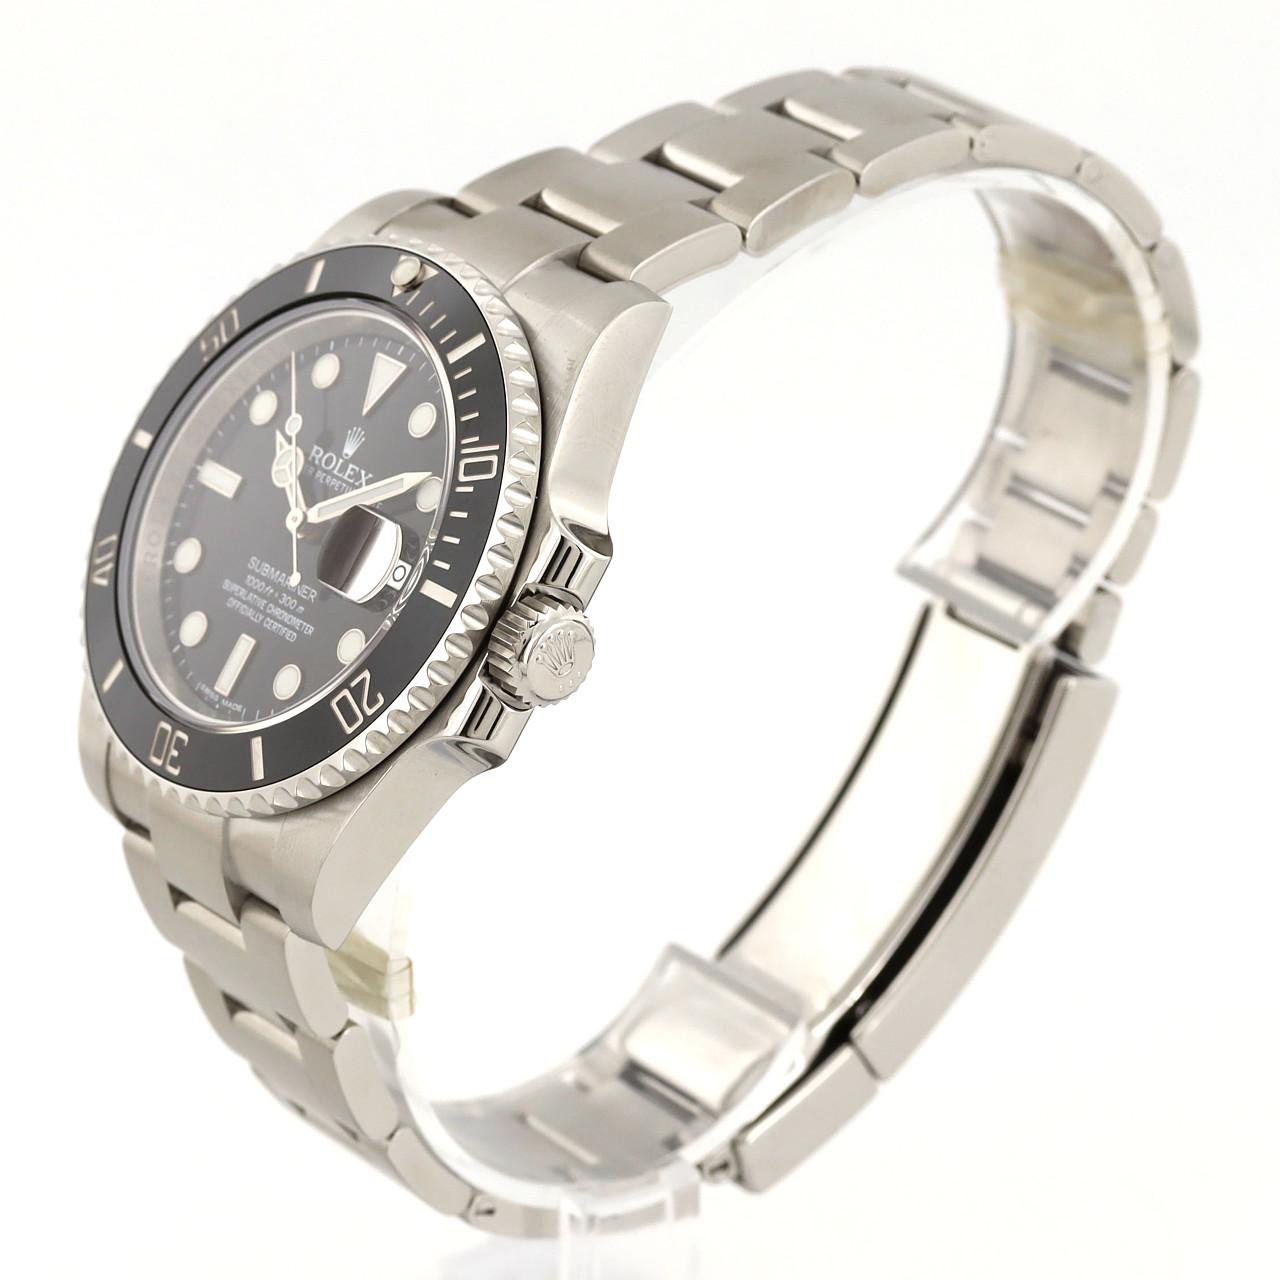 ROLEX Submariner Date 116610LN SS Automatic random number